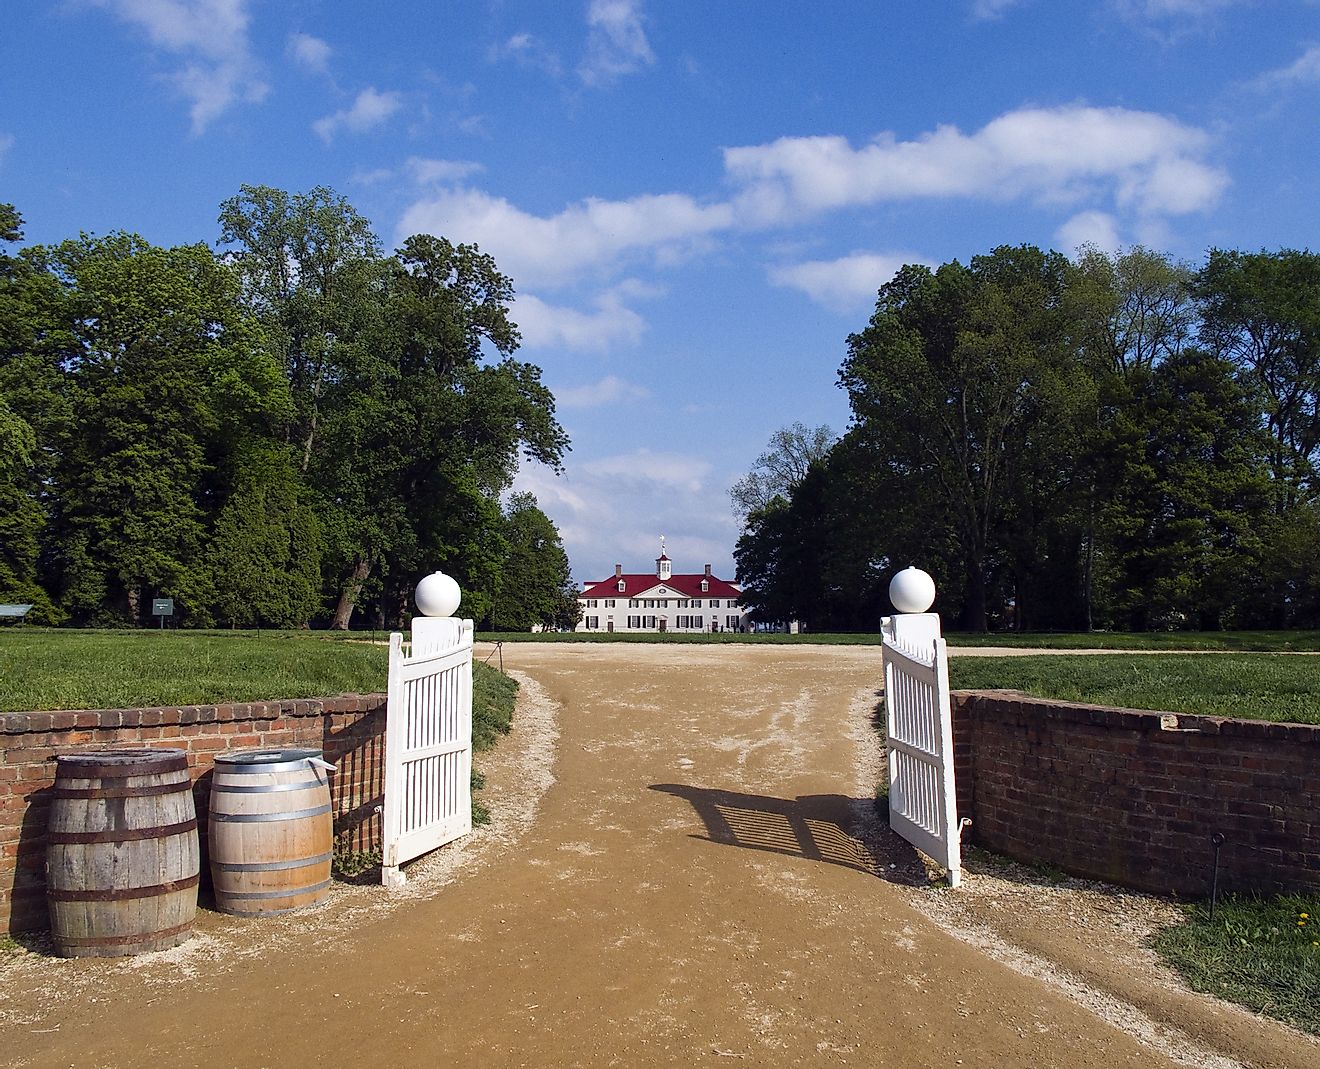 Driveway and Gate to Mount Vernon Home of George and Martha Washington.